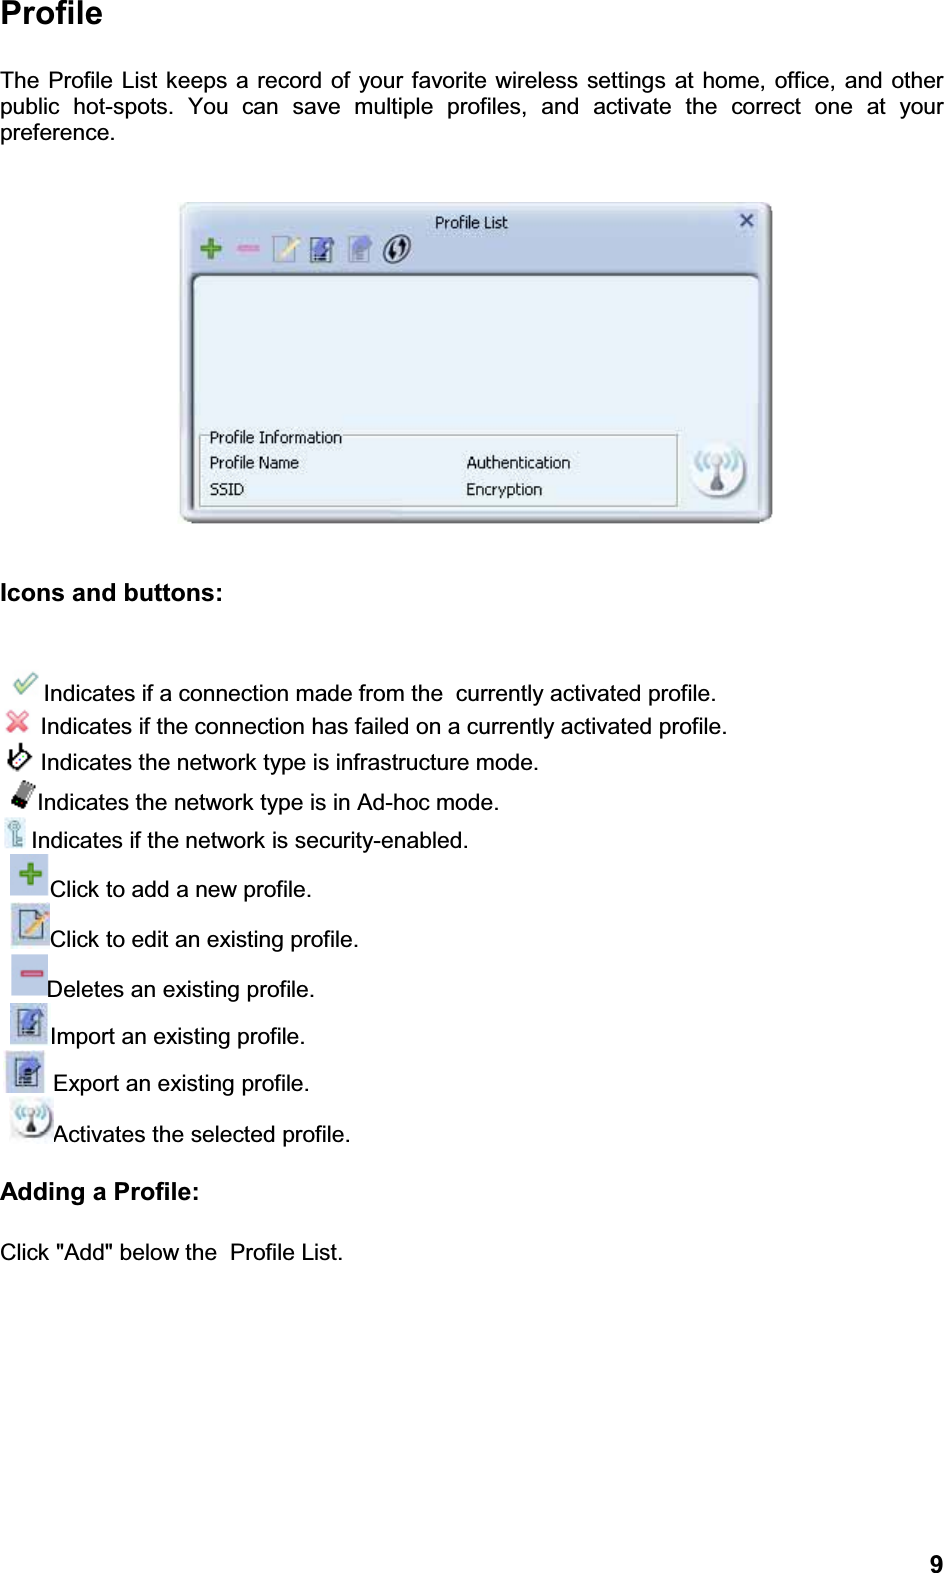 9ProfileThe Profile List keeps a record of your favorite wireless settings at home, office, and other public hot-spots. You can save multiple profiles, and activate the correct one at your preference. Icons and buttons:Indicates if a connection made from the  currently activated profile.Indicates if the connection has failed on a currently activated profile.Indicates the network type is infrastructure mode.Indicates the network type is in Ad-hoc mode.Indicates if the network is security-enabled.Click to add a new profile.Click to edit an existing profile.Deletes an existing profile.Import an existing profile.Export an existing profile.Activates the selected profile.Adding a Profile: Click &quot;Add&quot; below the  Profile List.